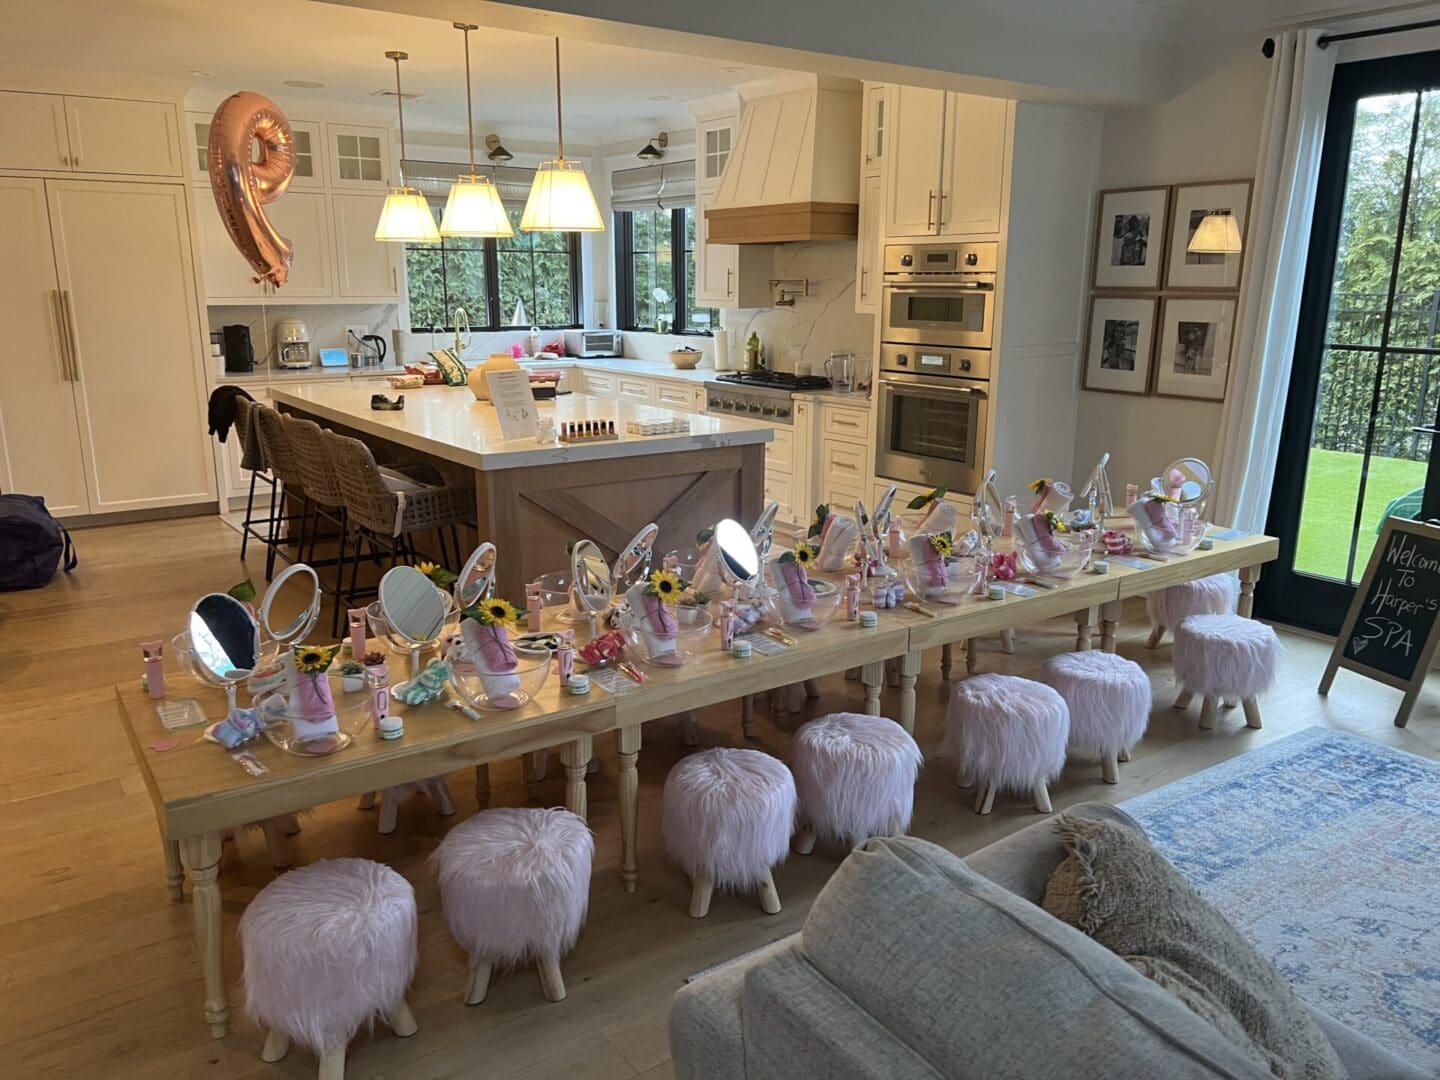 A living room with a table full of pink stools and mirrors.